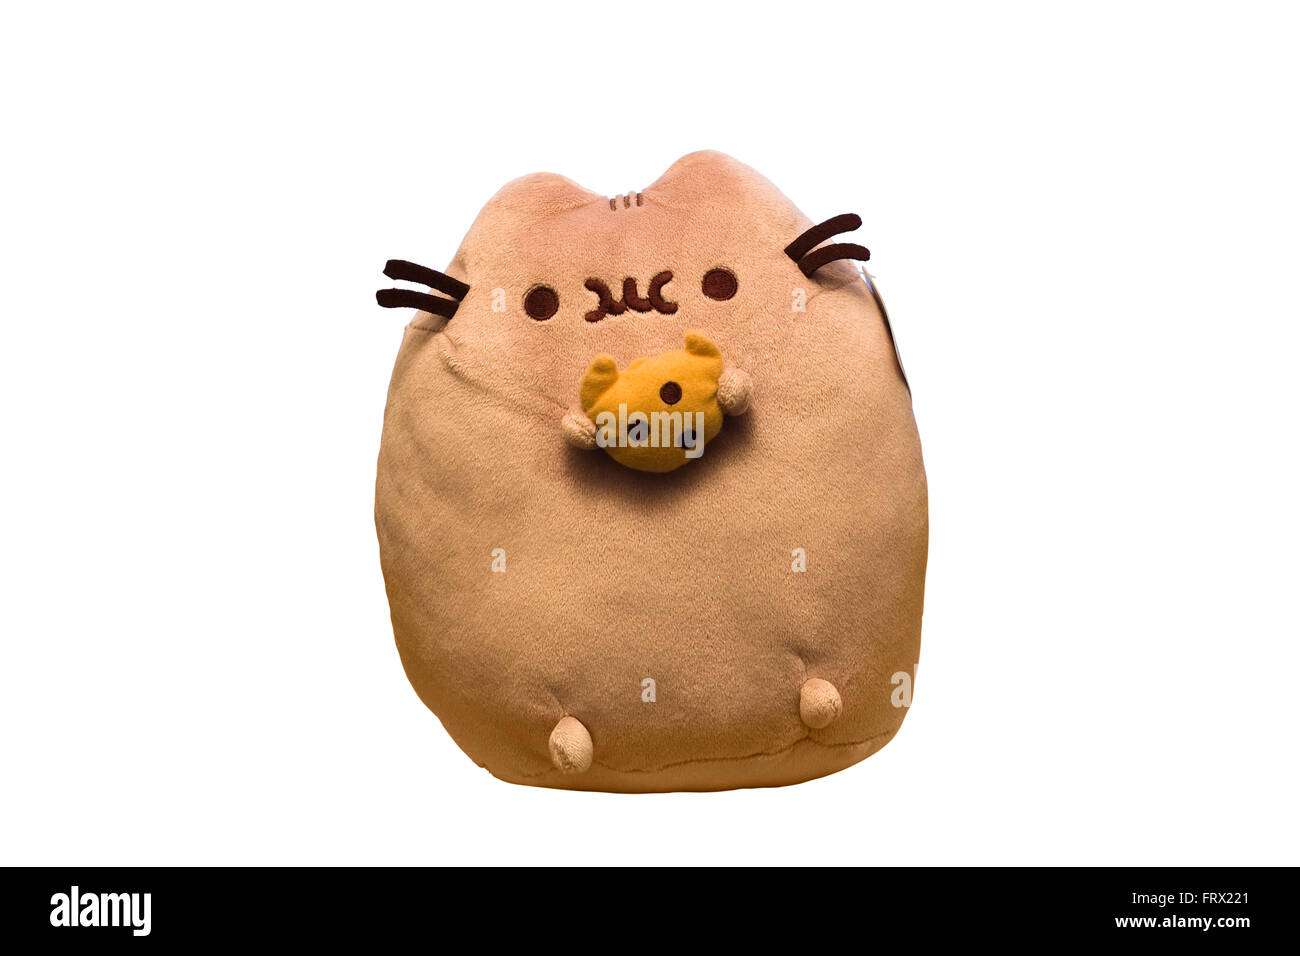 Cut Out. Very Fat Pusheen Cat Plush Toy Stuffed Animal eating a Chocolate Chip Cookie isolated on white background Stock Photo